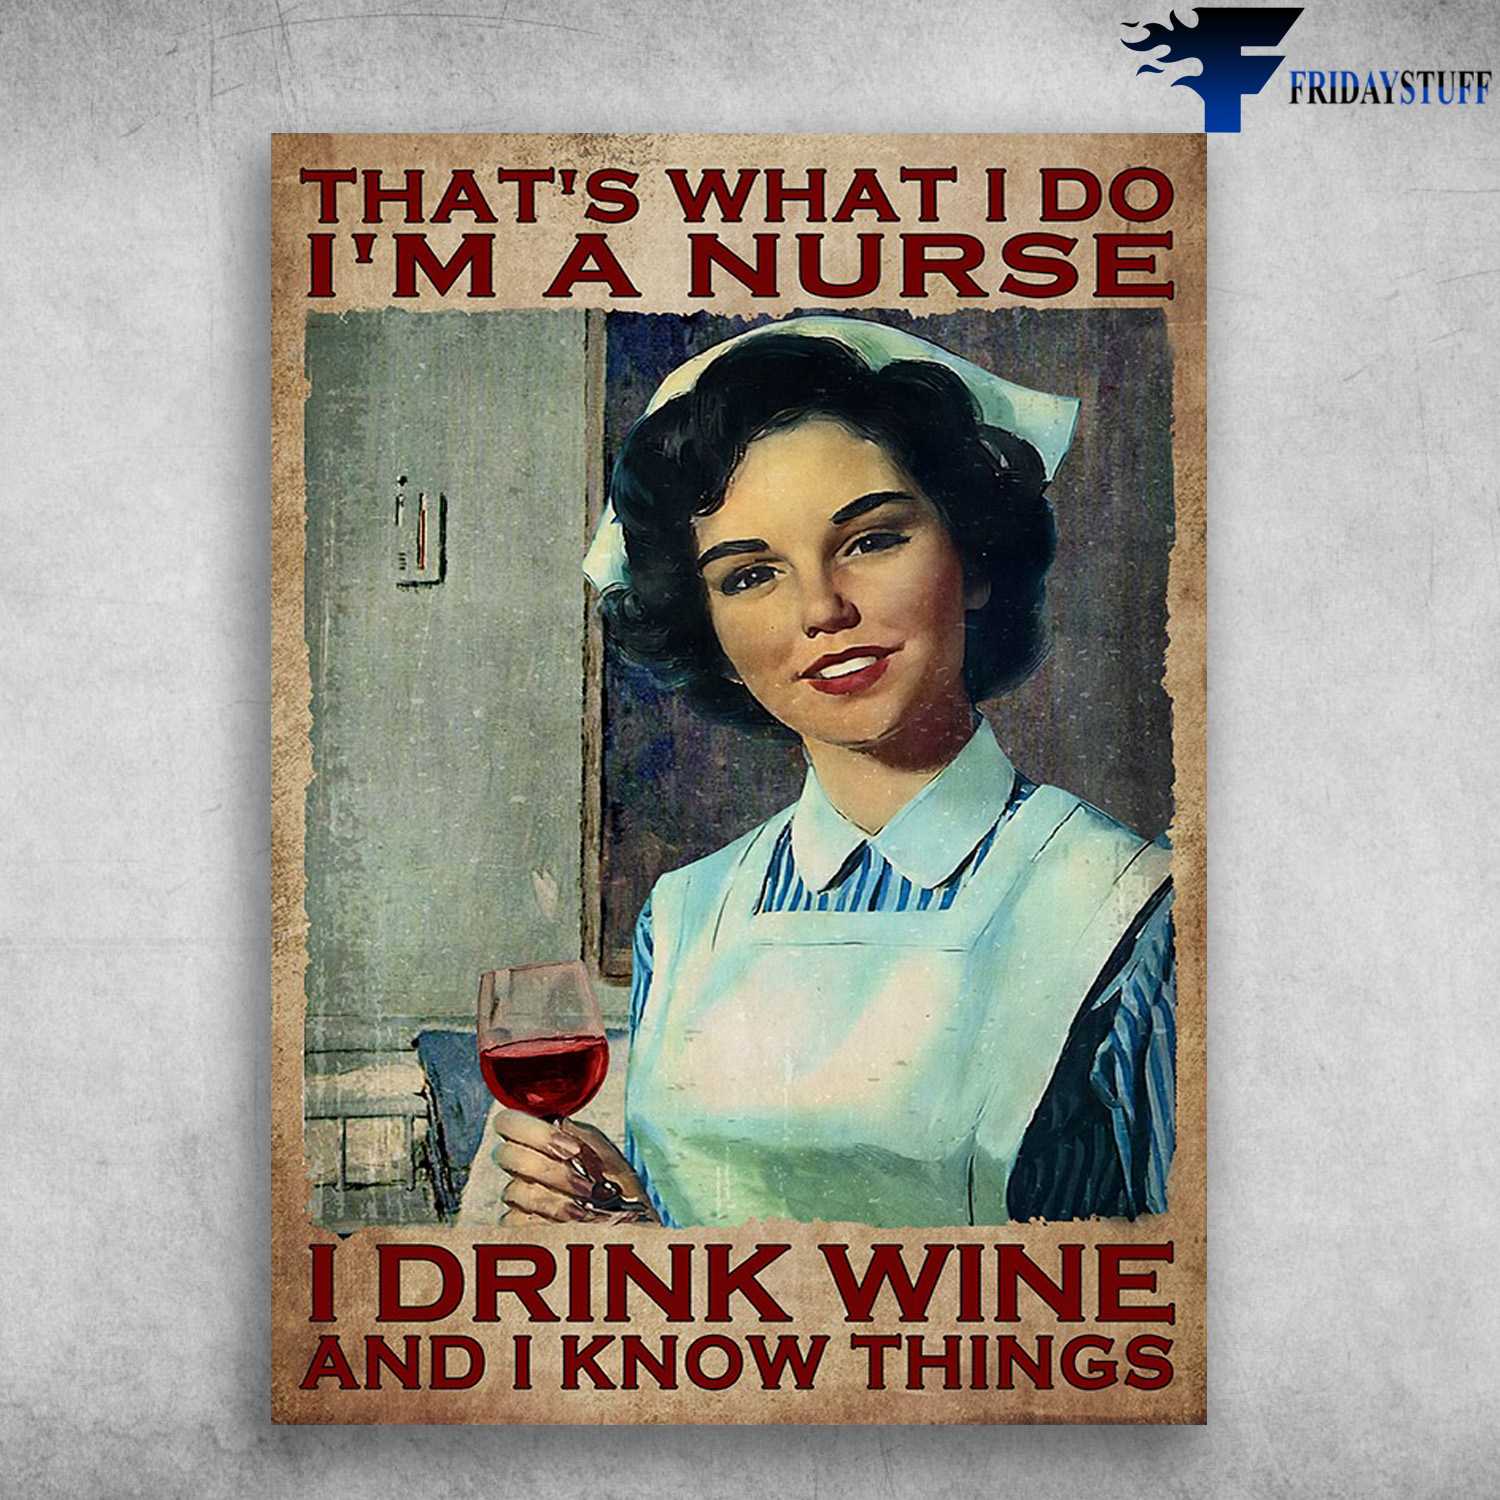 Nurse And Wine - That's What I Do, I'm A Nurse, I Drink Wine, And I Know Things